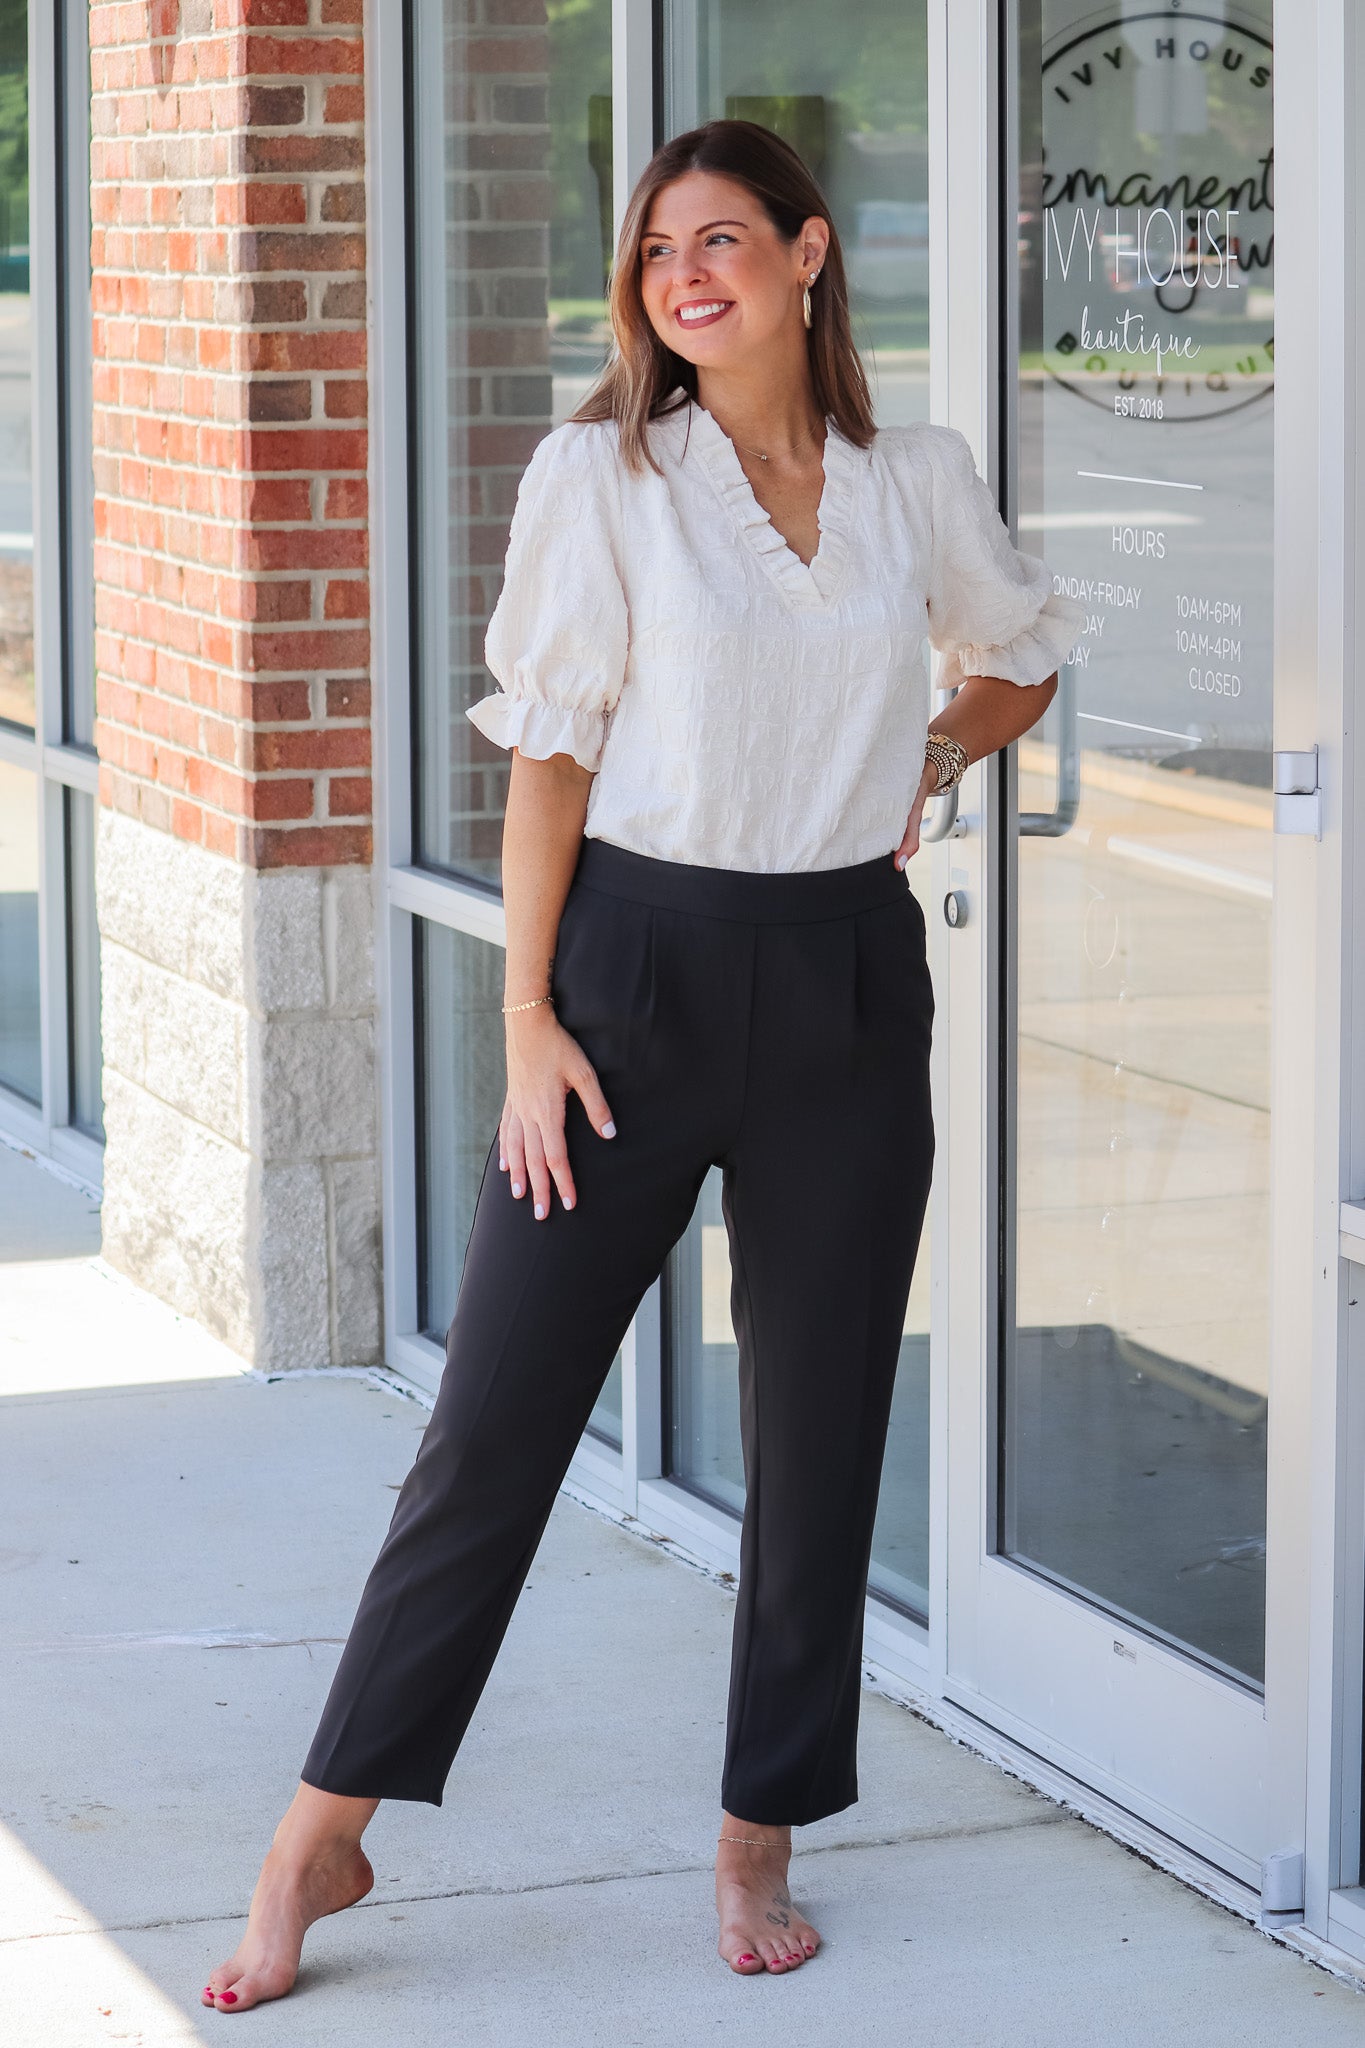 Alfred Dunner® Pull-On Pants-JCPenney